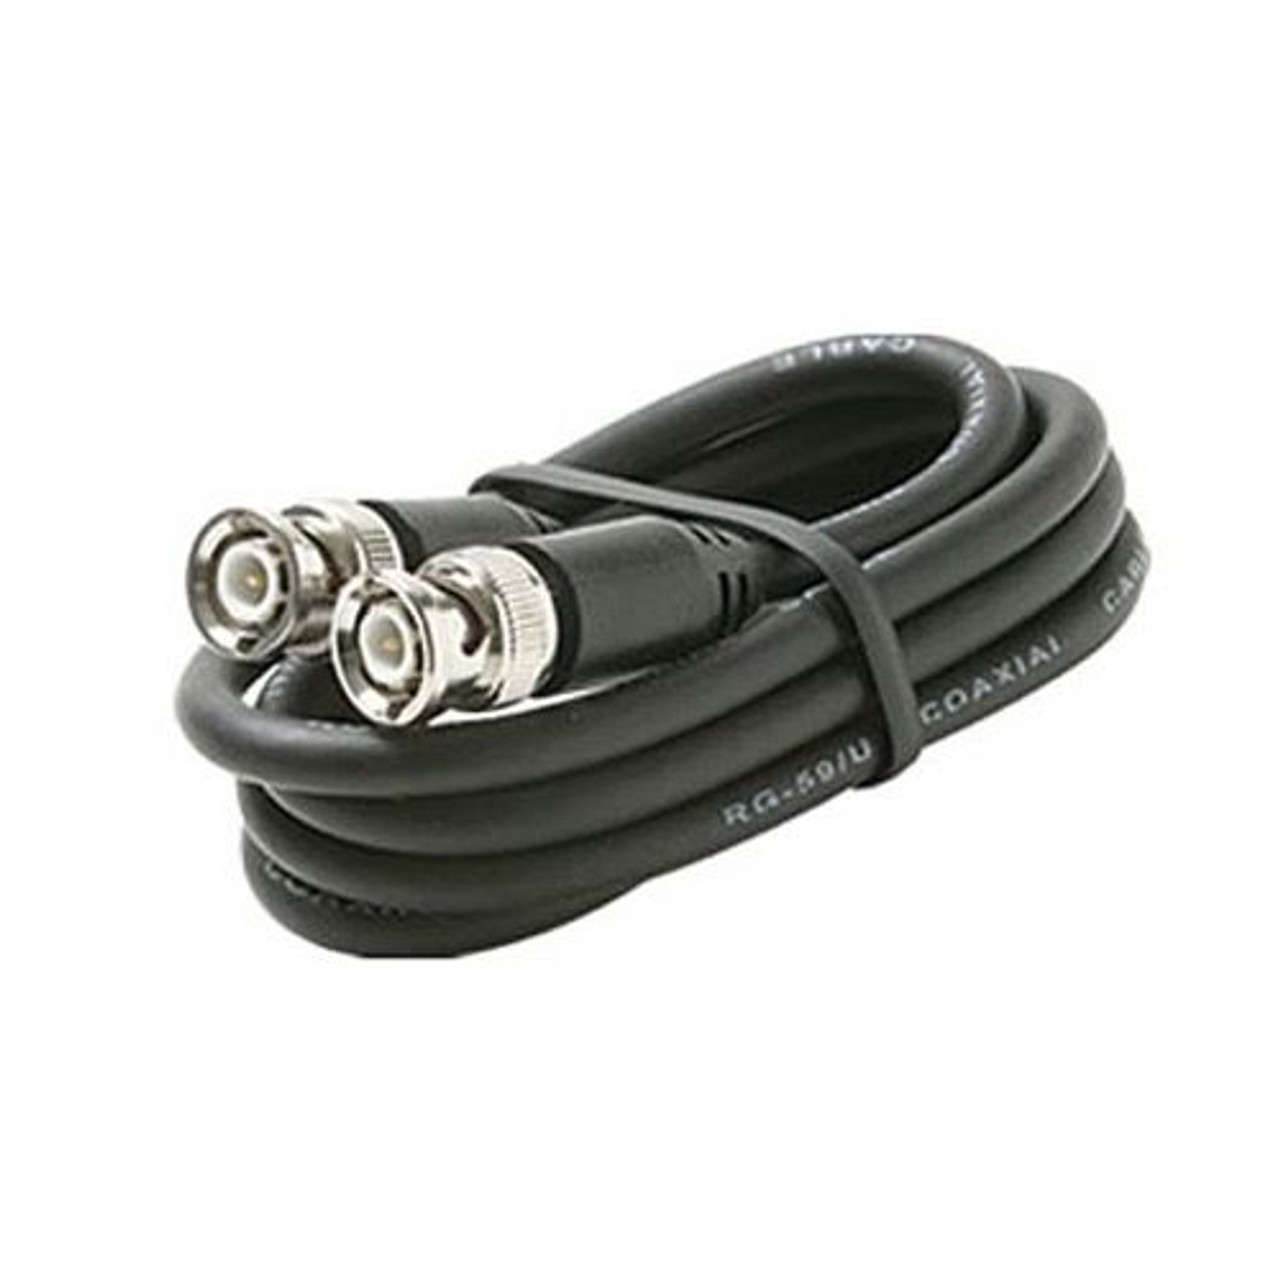 Steren 205-521 3' FT BNC Coaxial Cable Male to Male Black Plug RG59 Nickel Plate Connector Each End BNC Male to BNC Male RG-59 Factory Installed BNC Connectors, Part # 205521